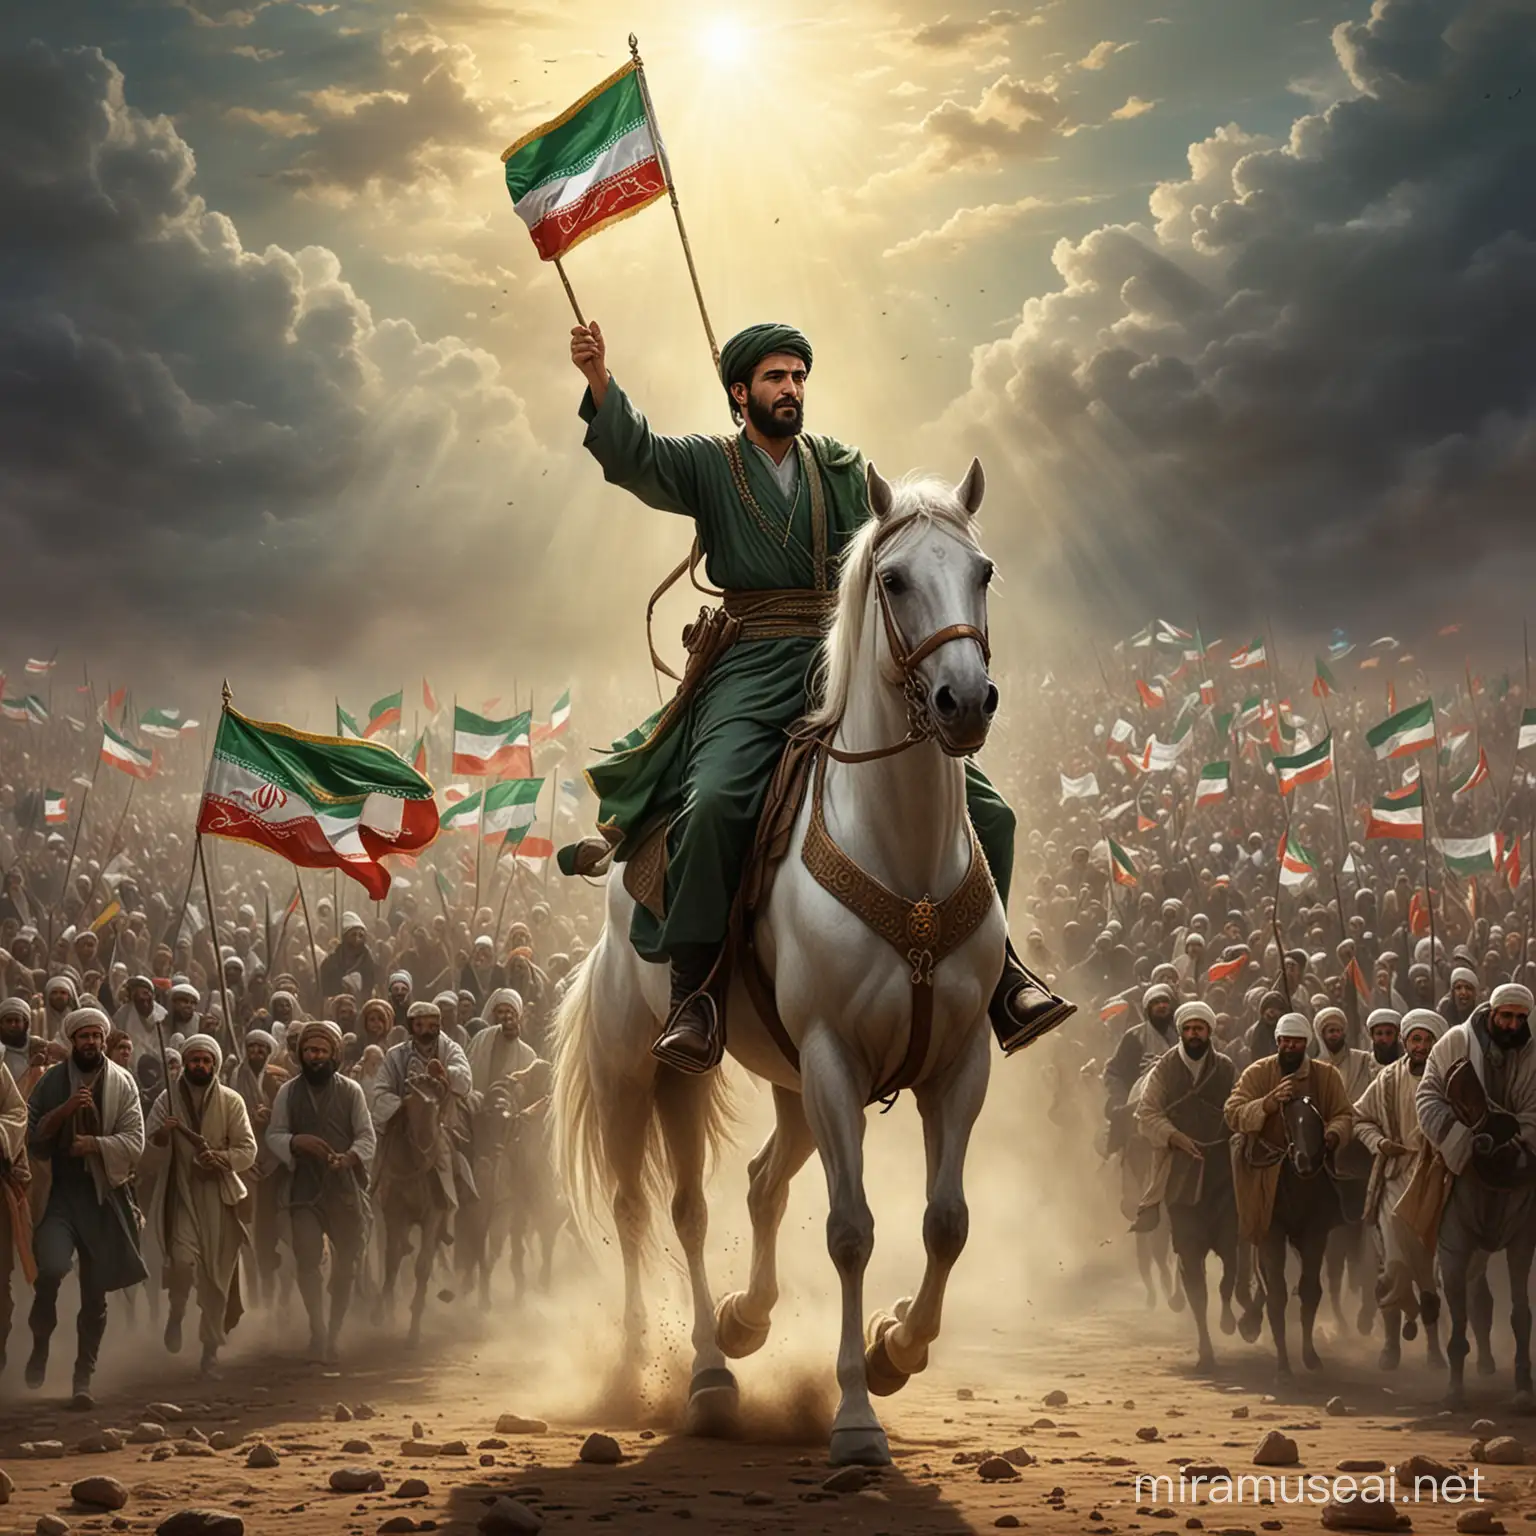  Based on the text you provided, which seems to be congratulating and celebrating a great victory for revolutionaries and fighters for freedom and justice, while also expressing hope for the reappearance of the Imam Mahdi, a fitting image suggestion would be:

An artistic rendition or symbolic representation of the Imam Mahdi (the guided one from the Prophet's lineage whose return Shia Muslims await). This could depict him radiating divine light, sitting on a horse, or portrayed in a way that conveys his awaited coming to establish justice on Earth.

The image could also incorporate elements symbolizing revolution, freedom, and justice, such as people raising flags, breaking chains, or marching together united.

Iranian or Islamic symbolic elements like the Iranian flag, crescents, domes of mosques etc. could be included to connect it to the Iranian Islamic context mentioned.

Overall, the image should be inspirational, conveying the themes of revolutionary struggle, hope for justice and freedom, and the reappearance of the awaited savior figure through powerful symbolism and artistic styling.